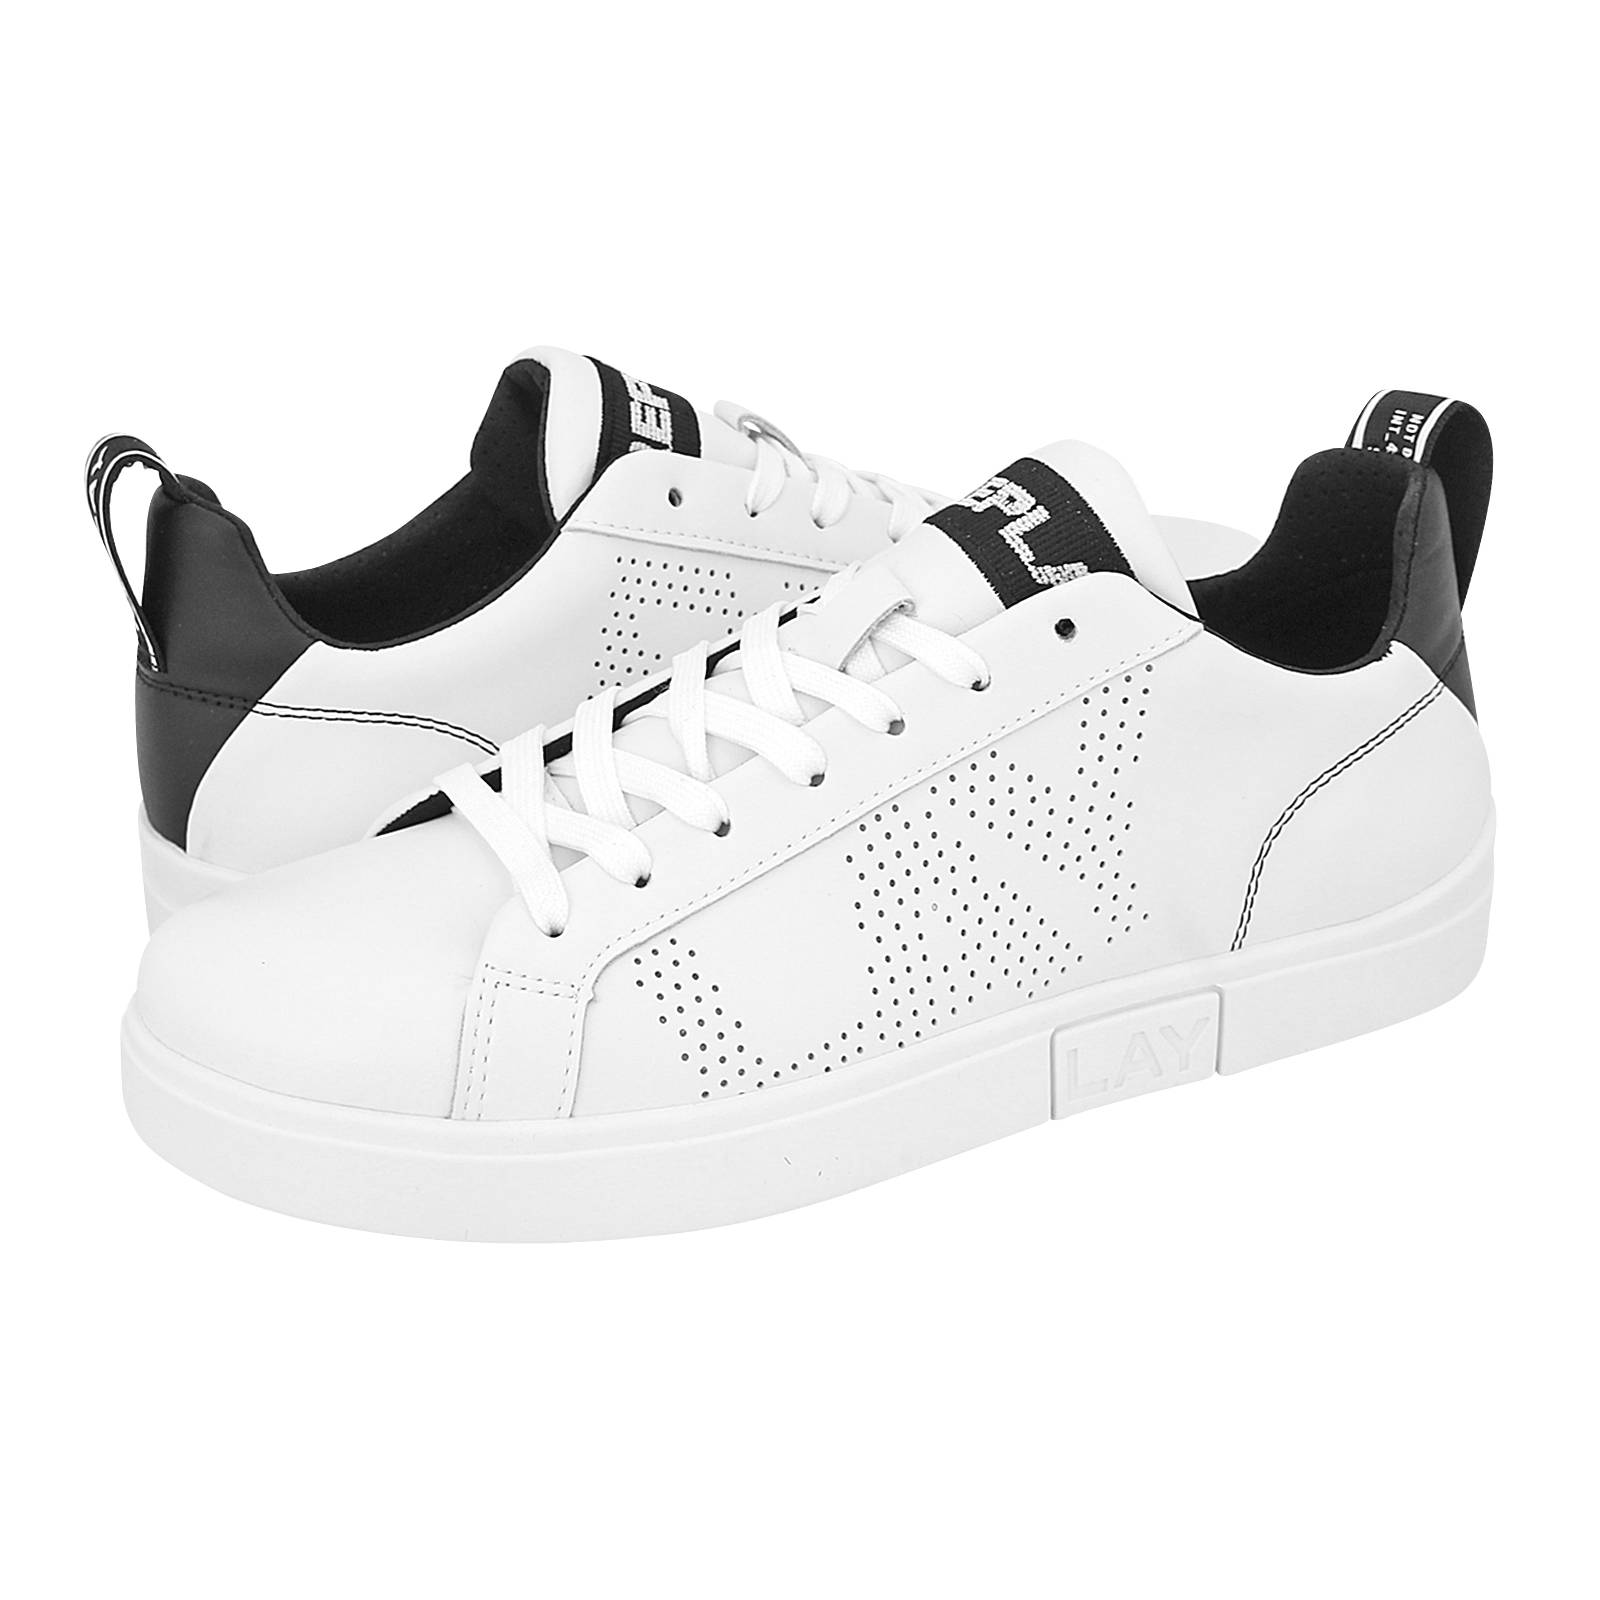 Polaris Perf - Replay Men's casual shoes made of synthetic leather ...